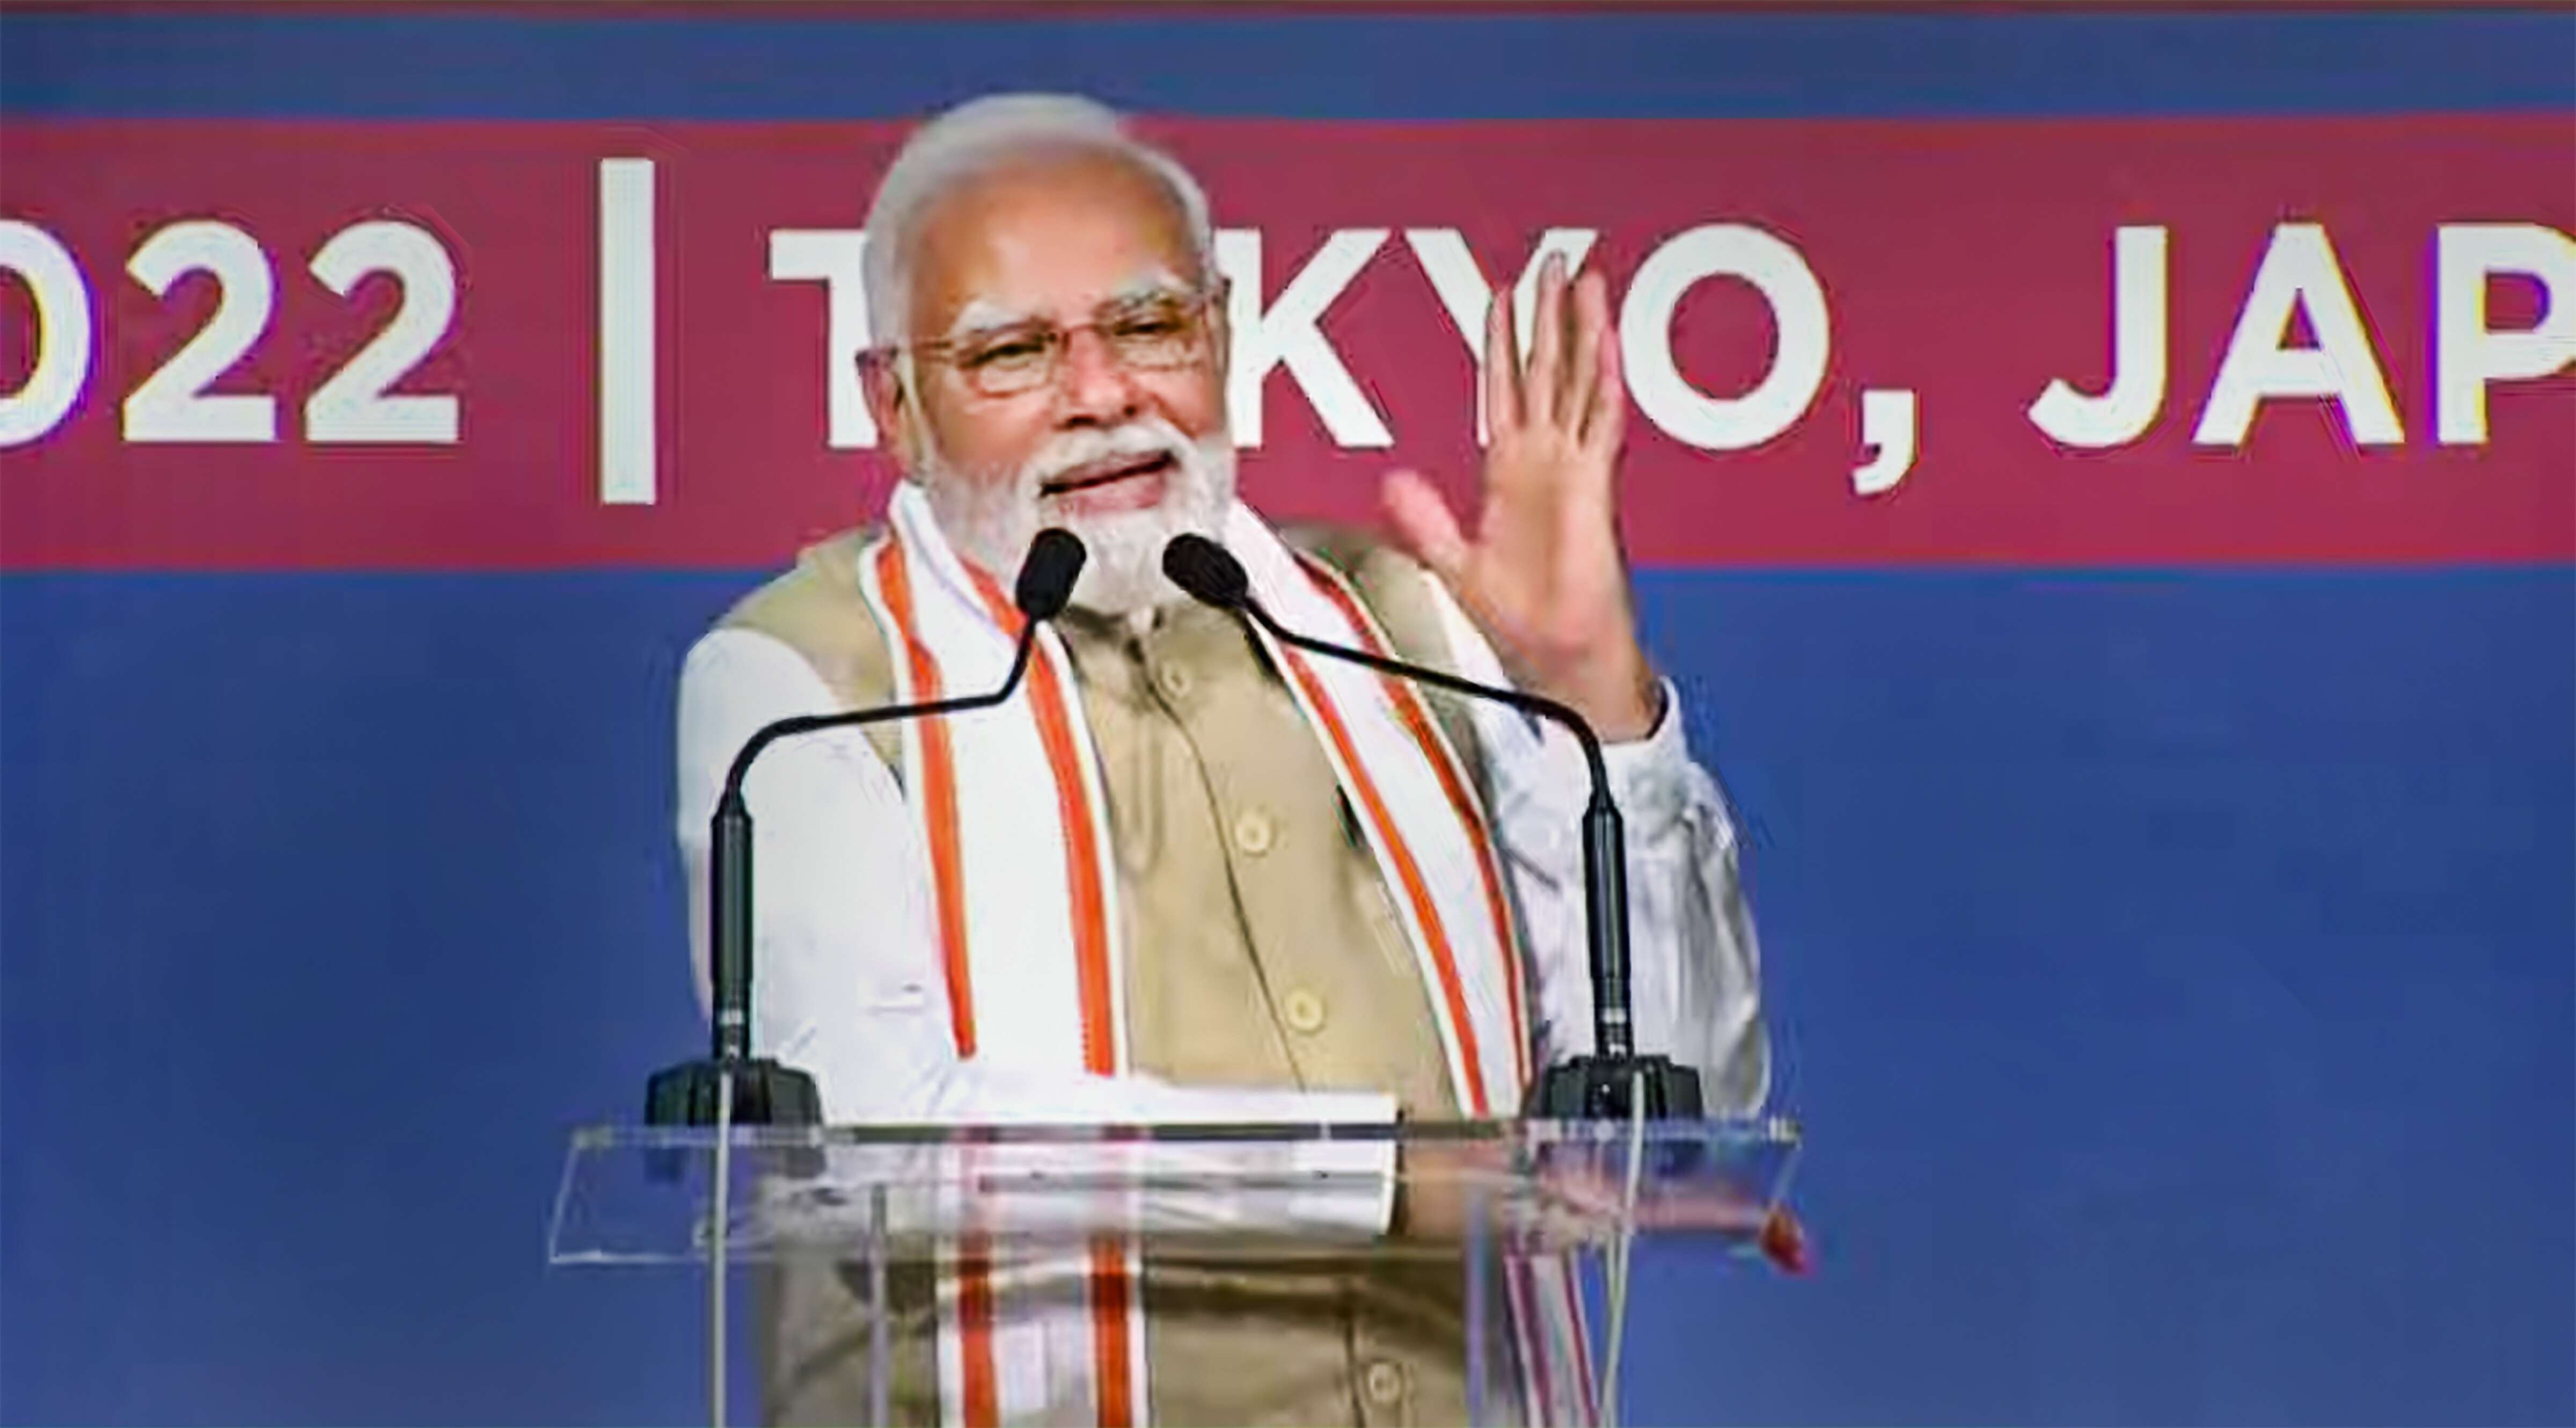 India, Japan are natural partners, PM Modi tells Indian community in Tokyo